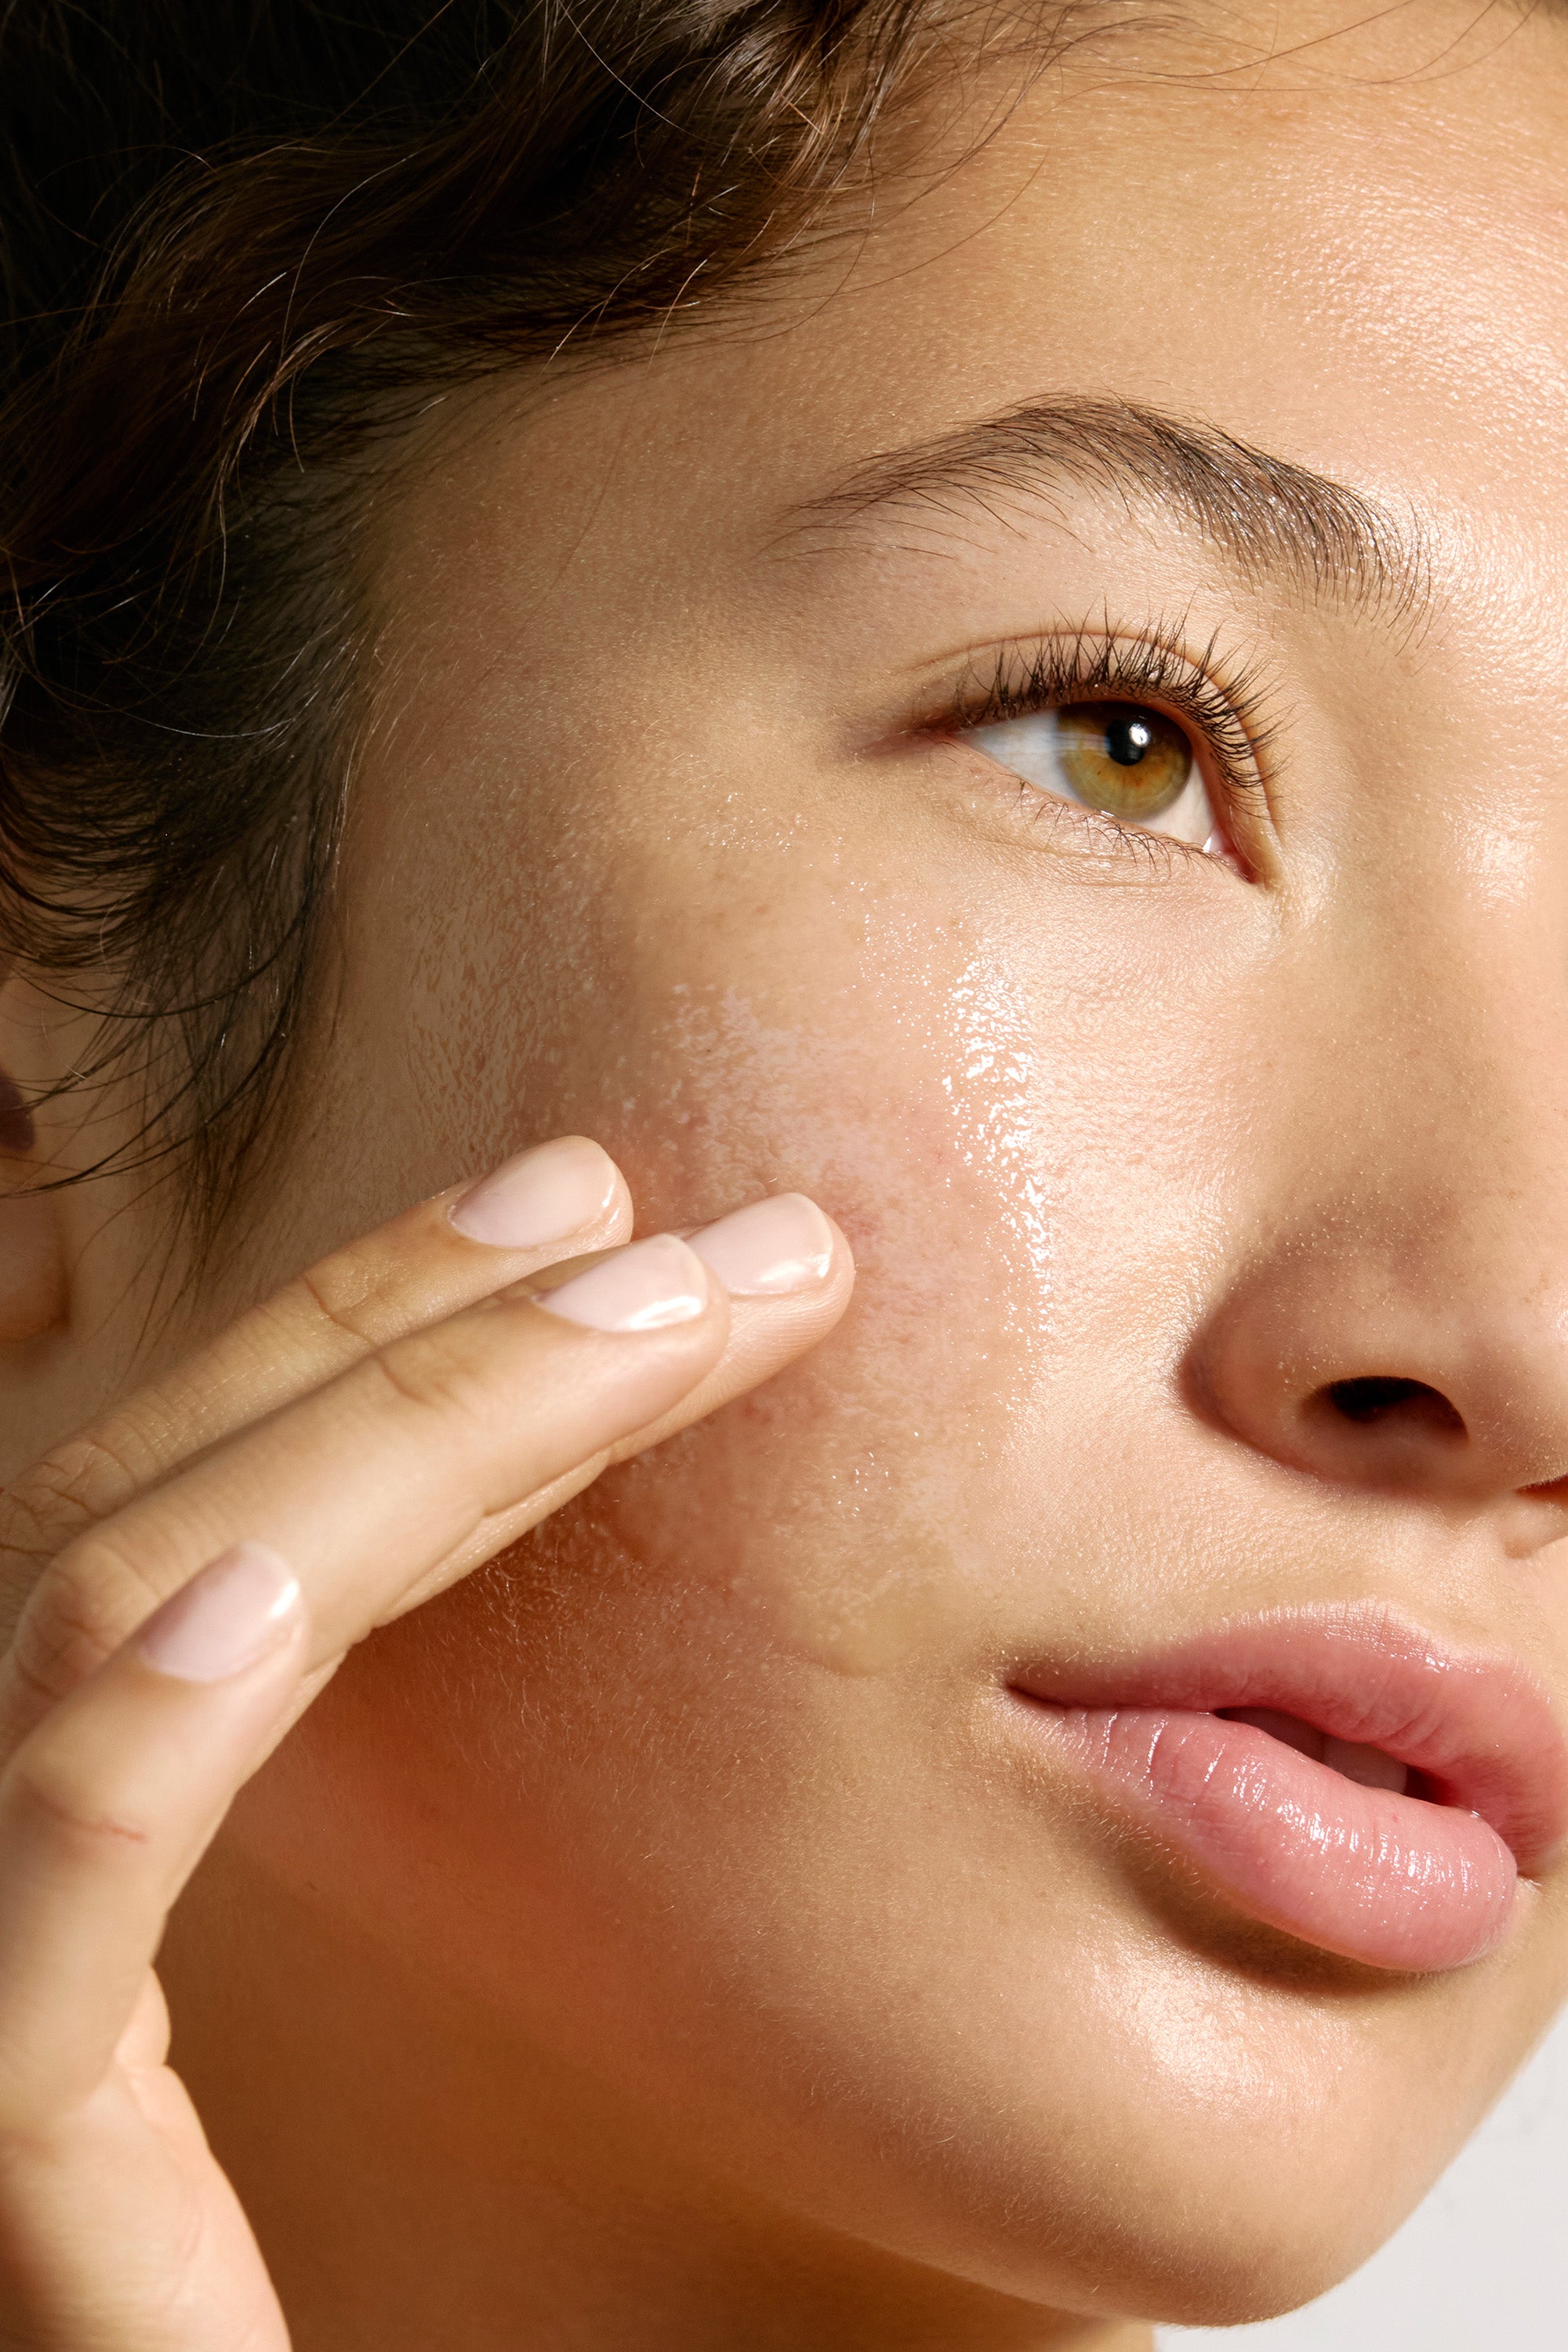 Close-up of a person with clear, glowing skin applying a creamy SPF30 Daily System sunscreen by Freaks of Nature Skincare to their cheek. The image focuses on the texture of their skin and the gentle application of the product. The background is out of focus, highlighting the subject’s face.